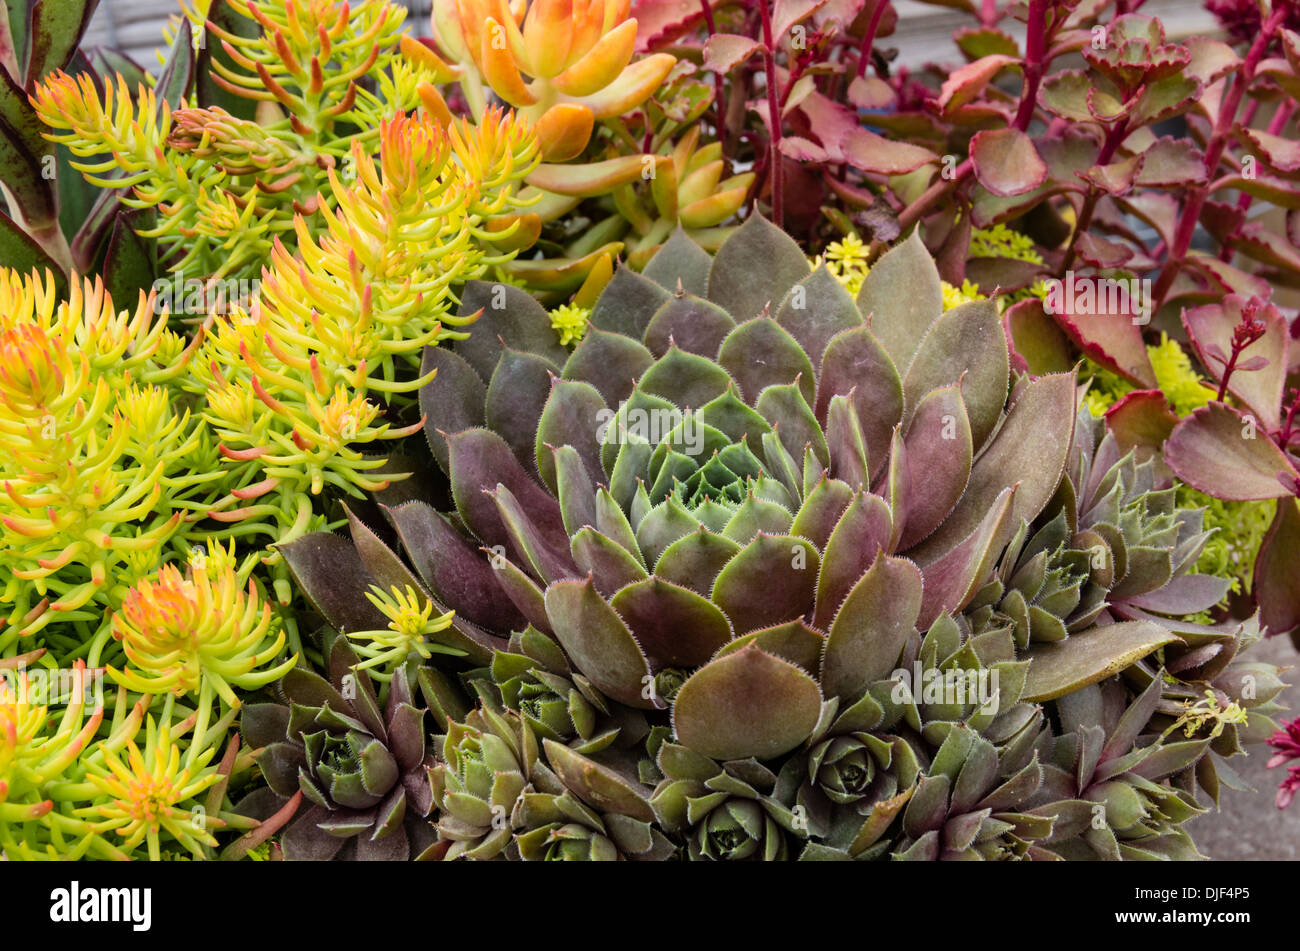 Sedum plants or sempervivum used for sustainable roof plantings Stock Photo